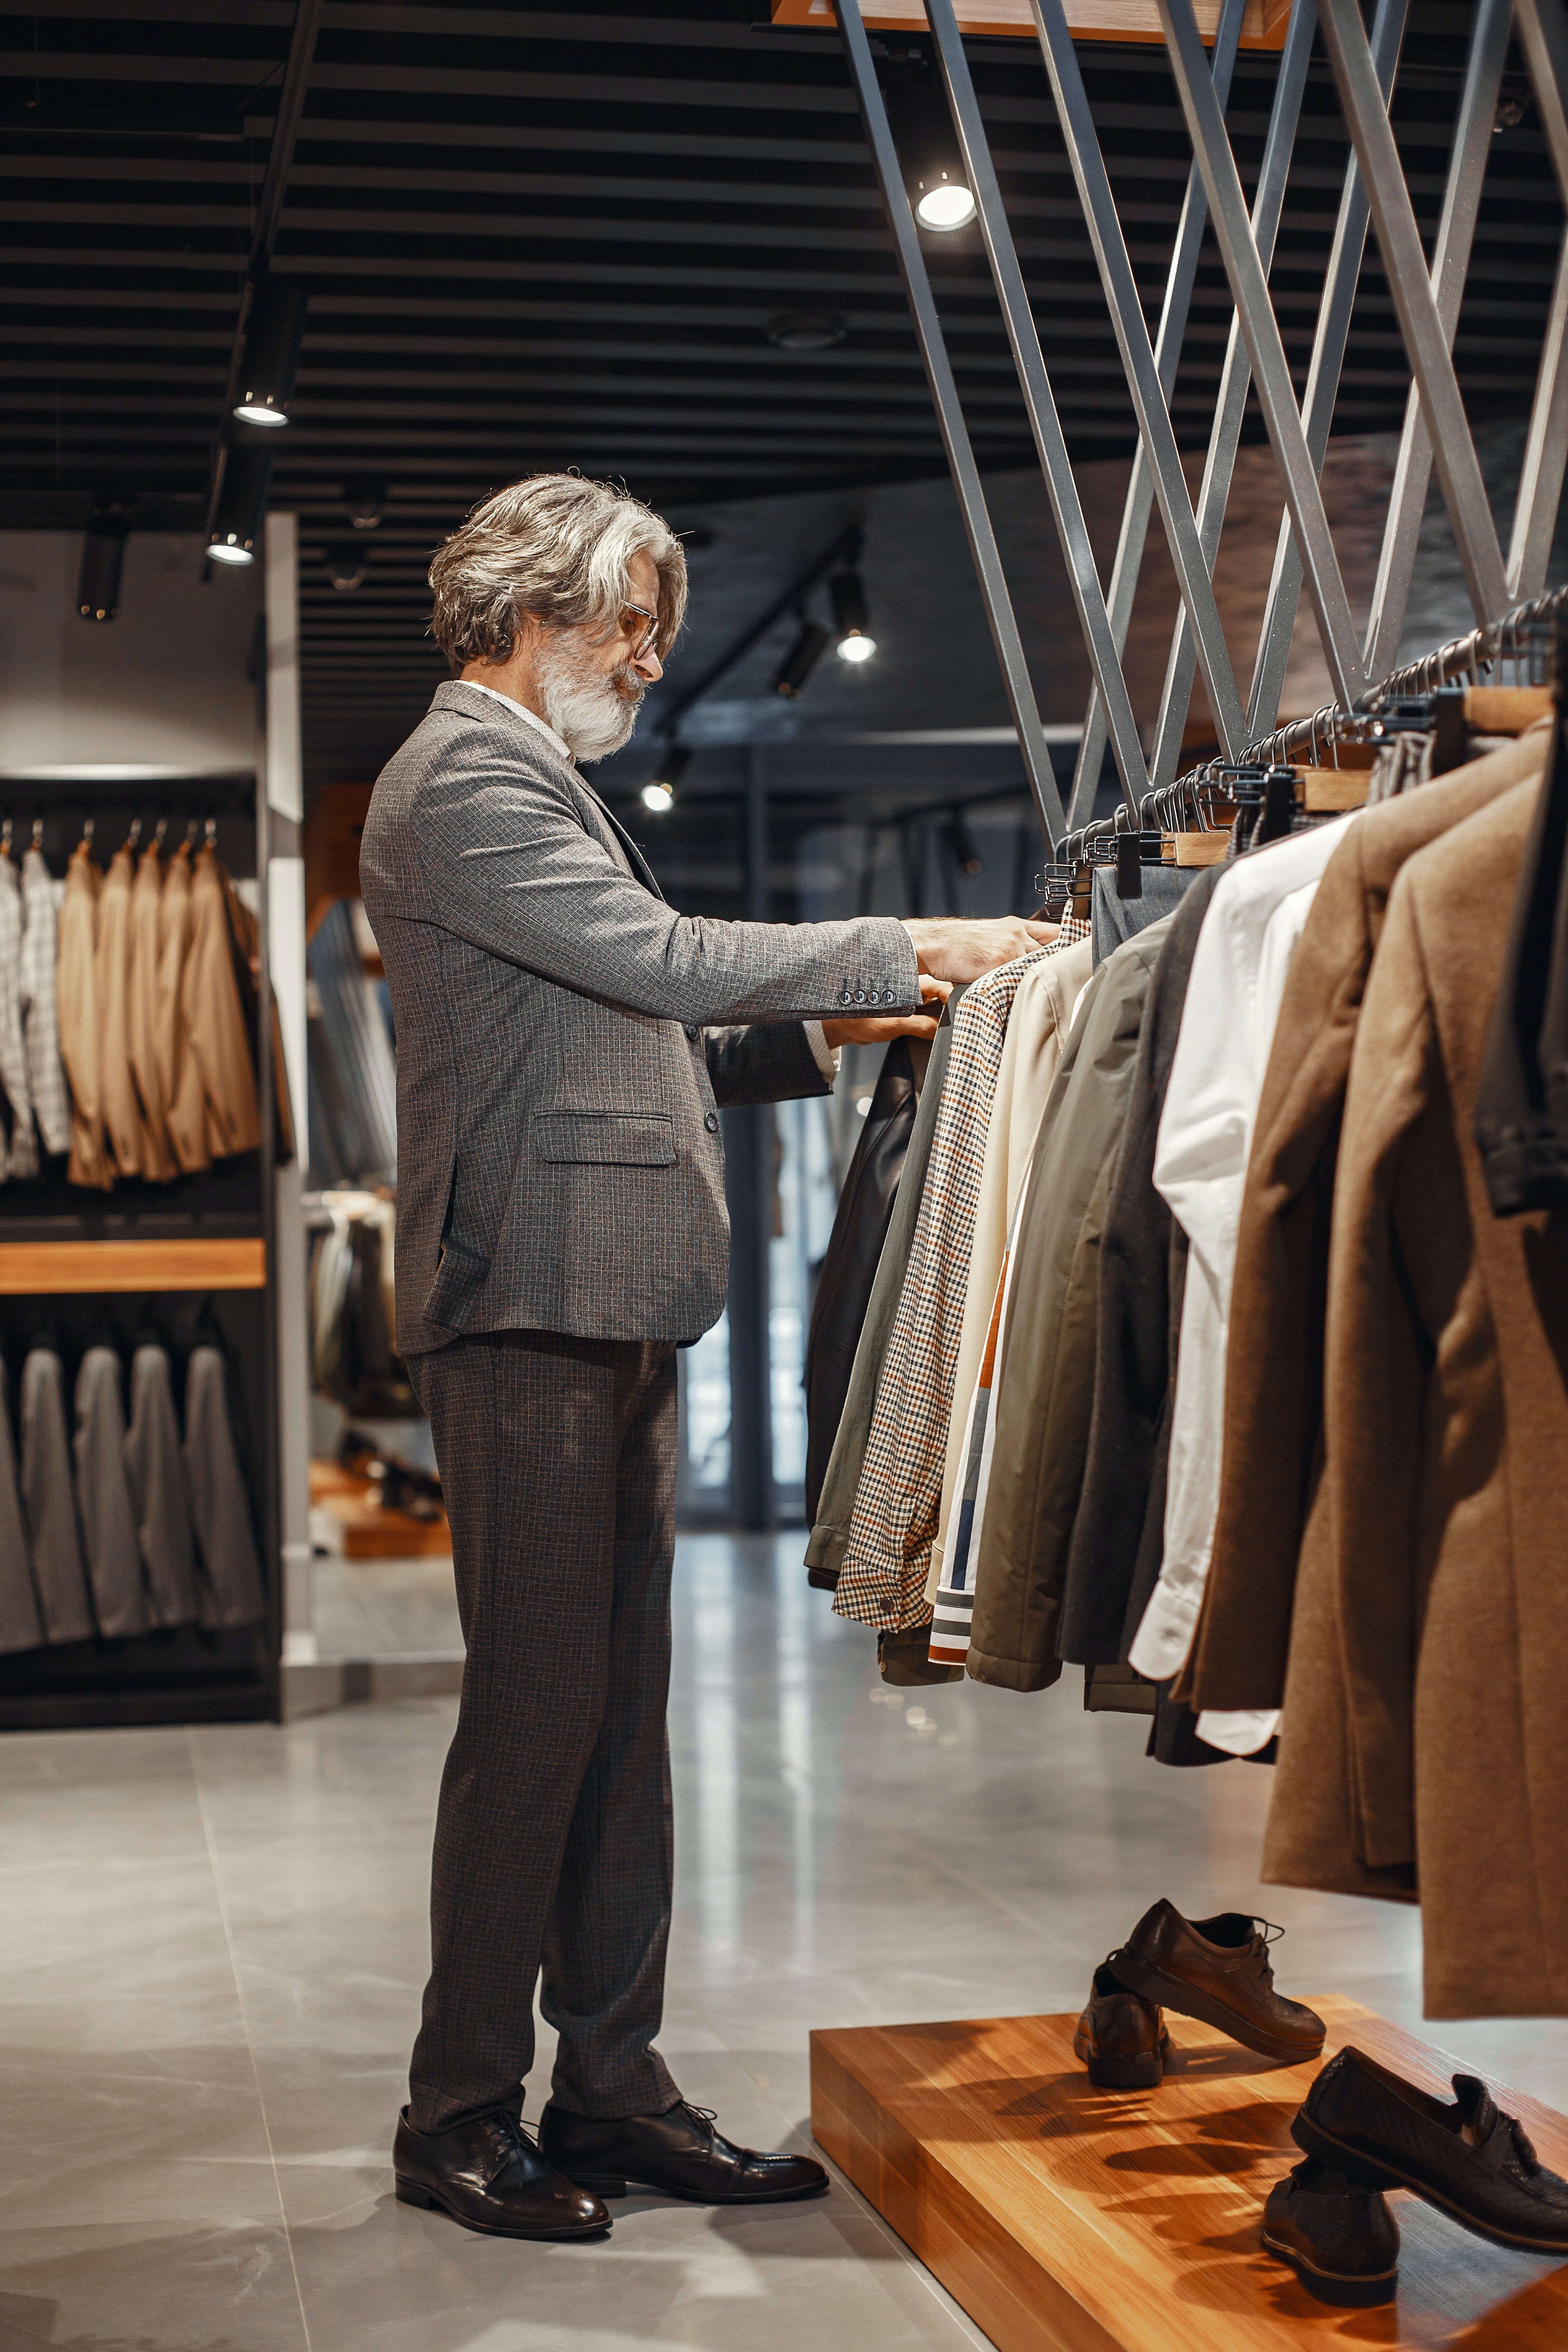 Mr. Combs hired Matthew to work in his store. | Source: Pexels